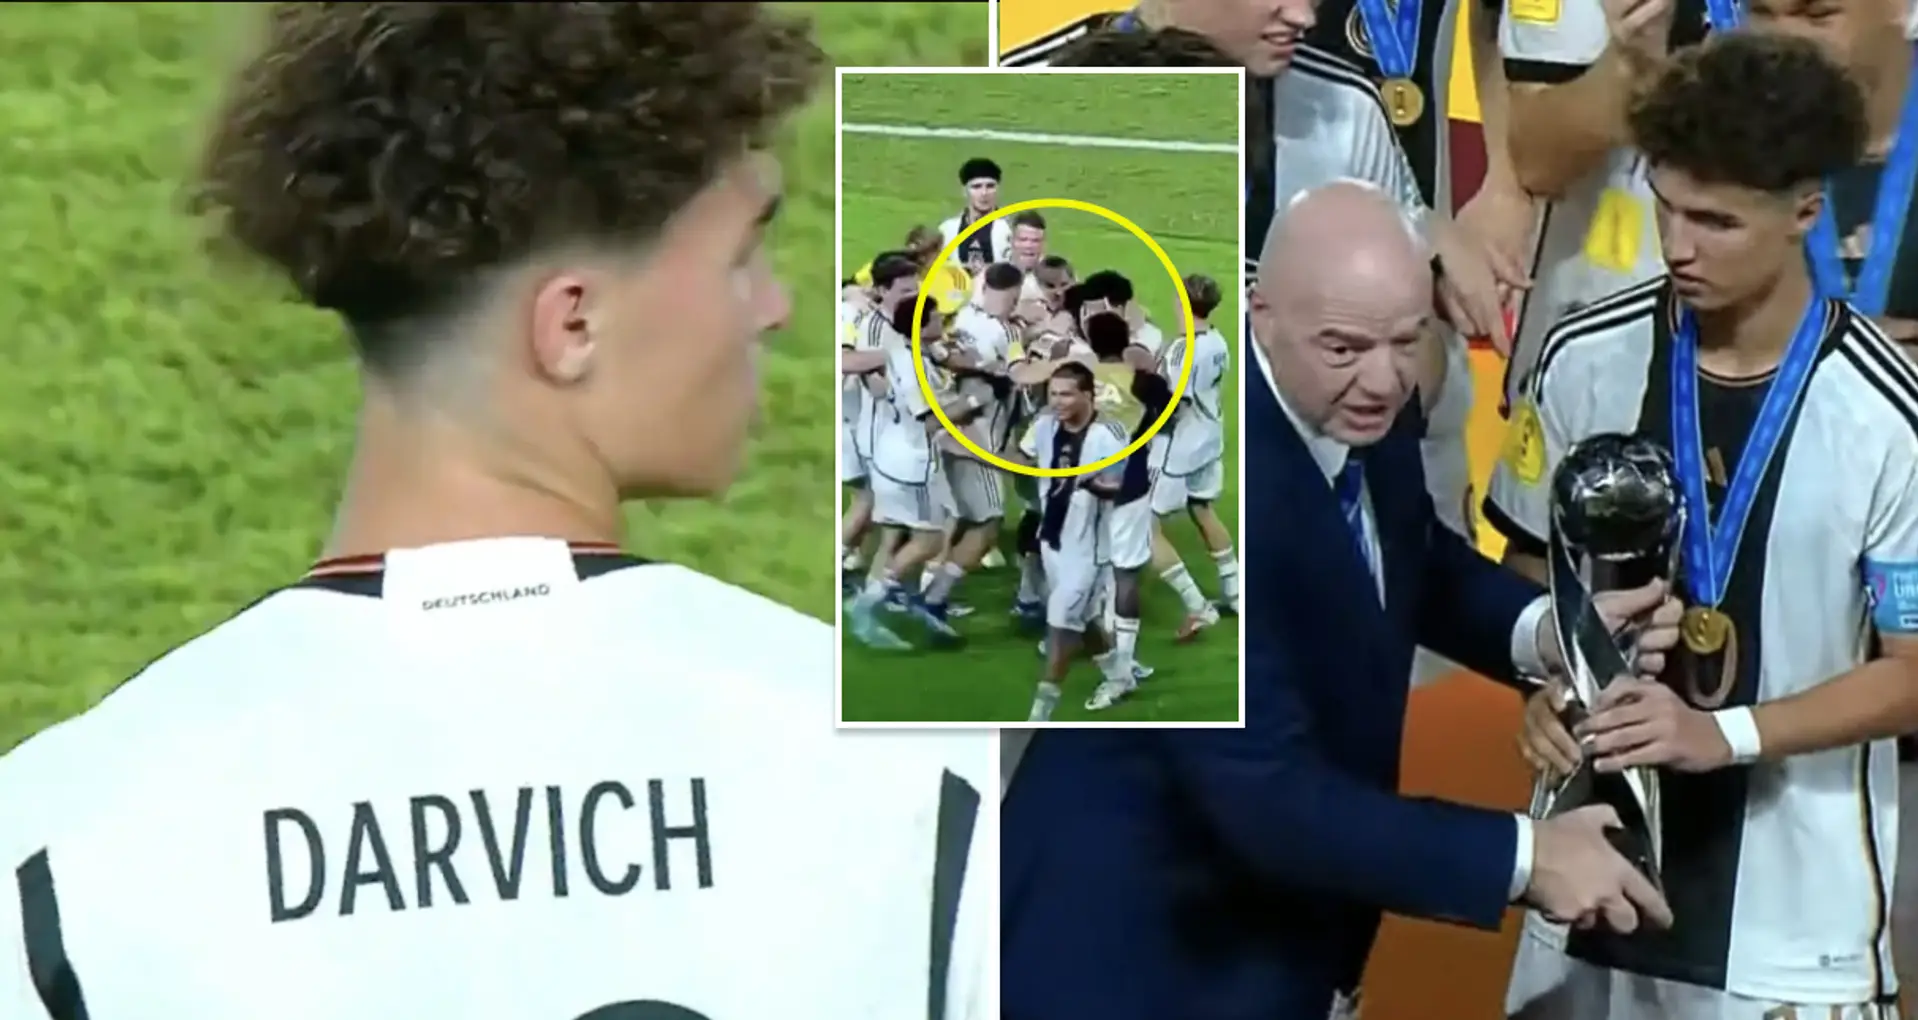 Noah Darvich captains Germany U17 to World Cup glory, scores in final